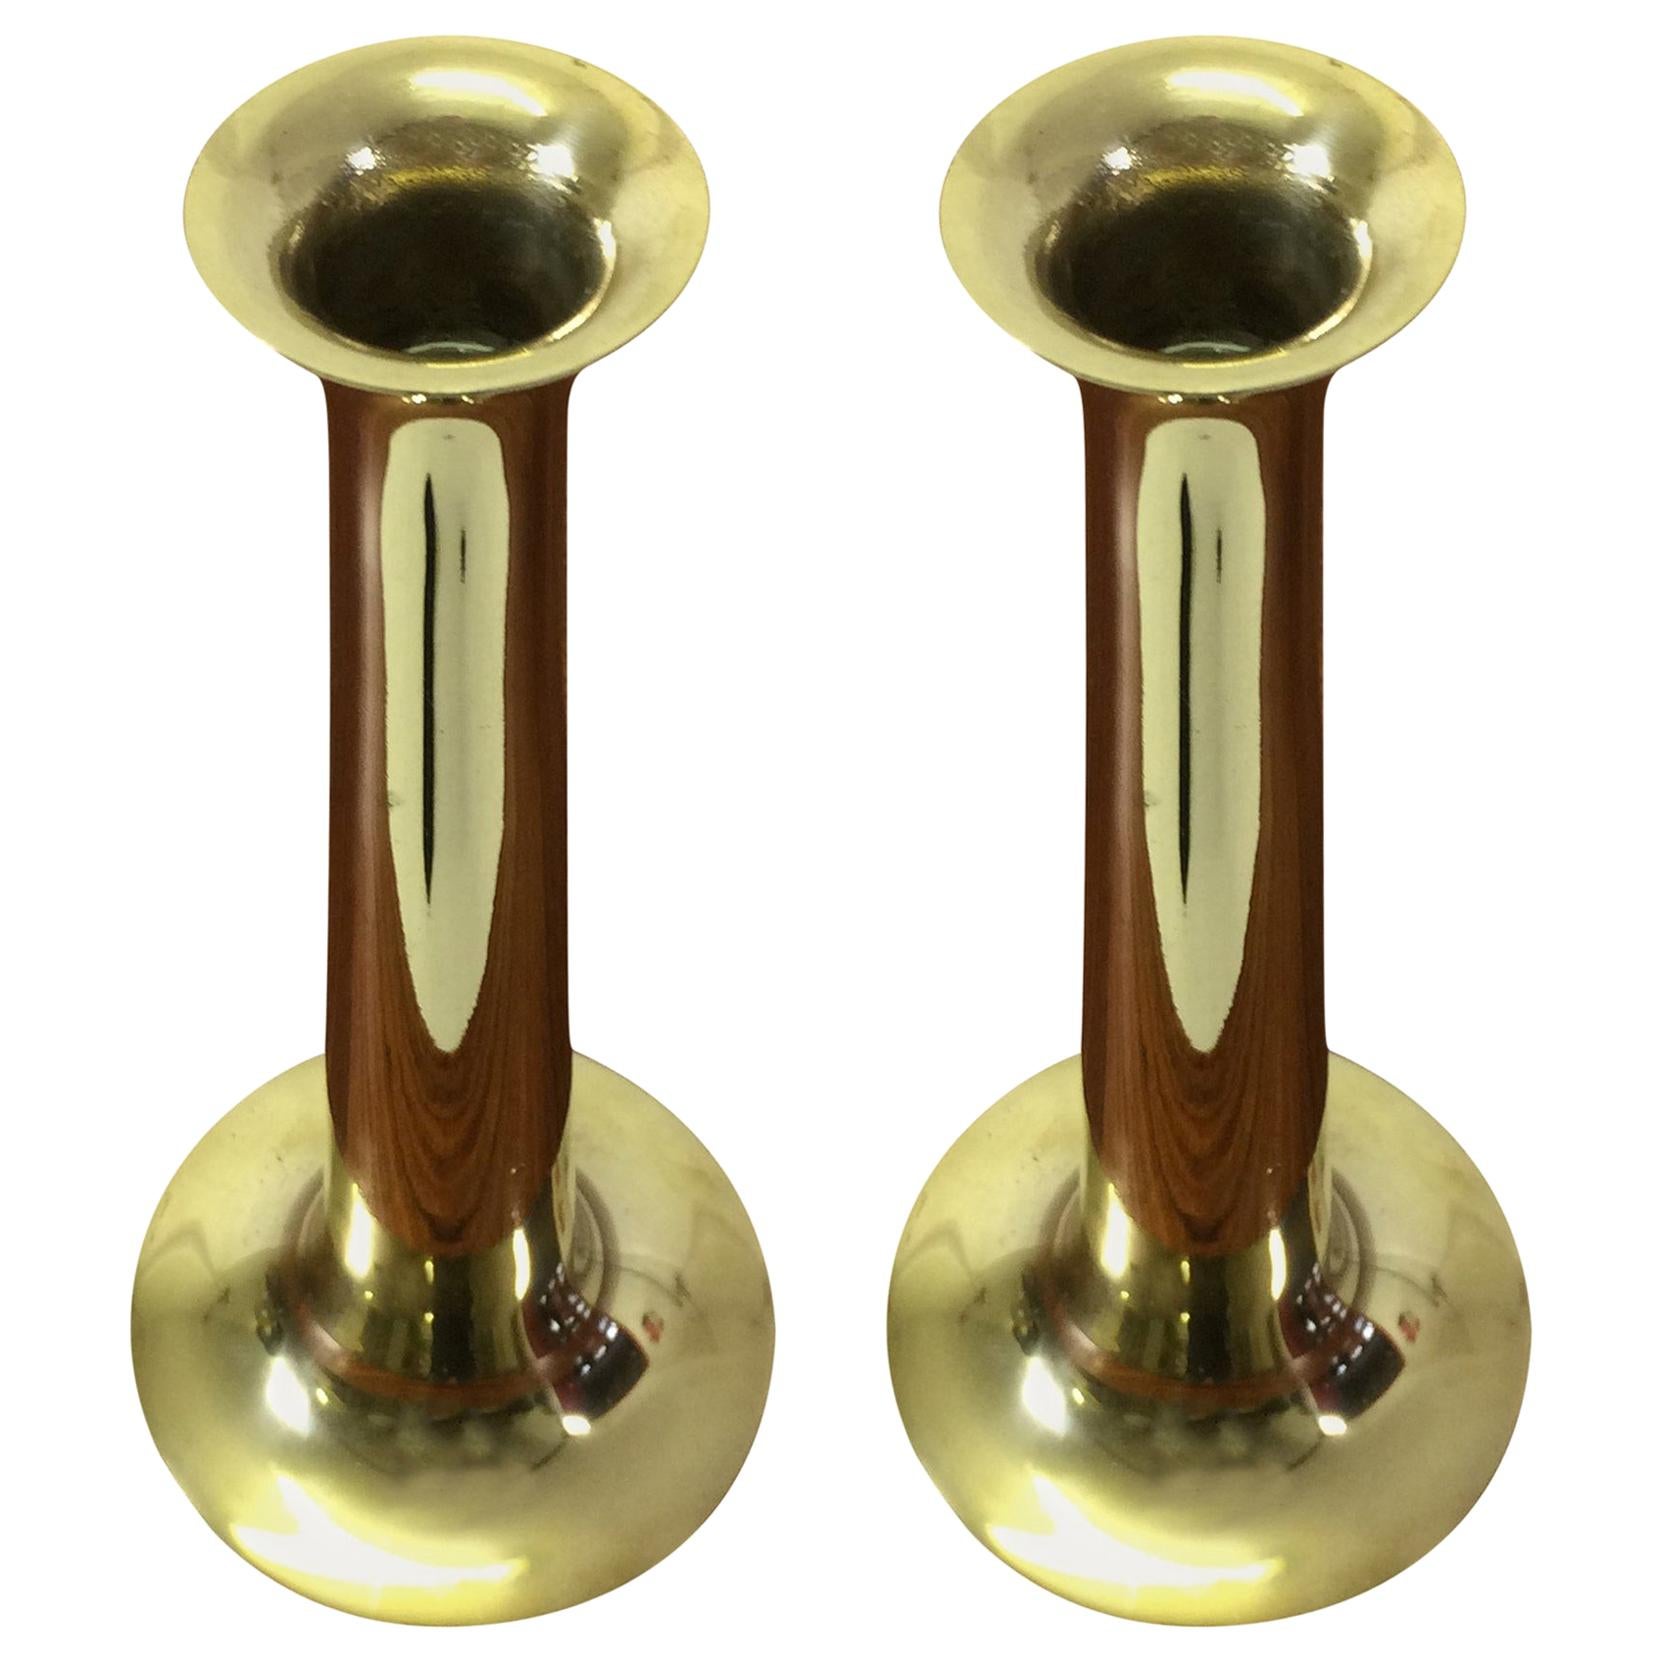 1960s Pair of Danish Hans Bolling Brass Candlesticks by T. Orskov